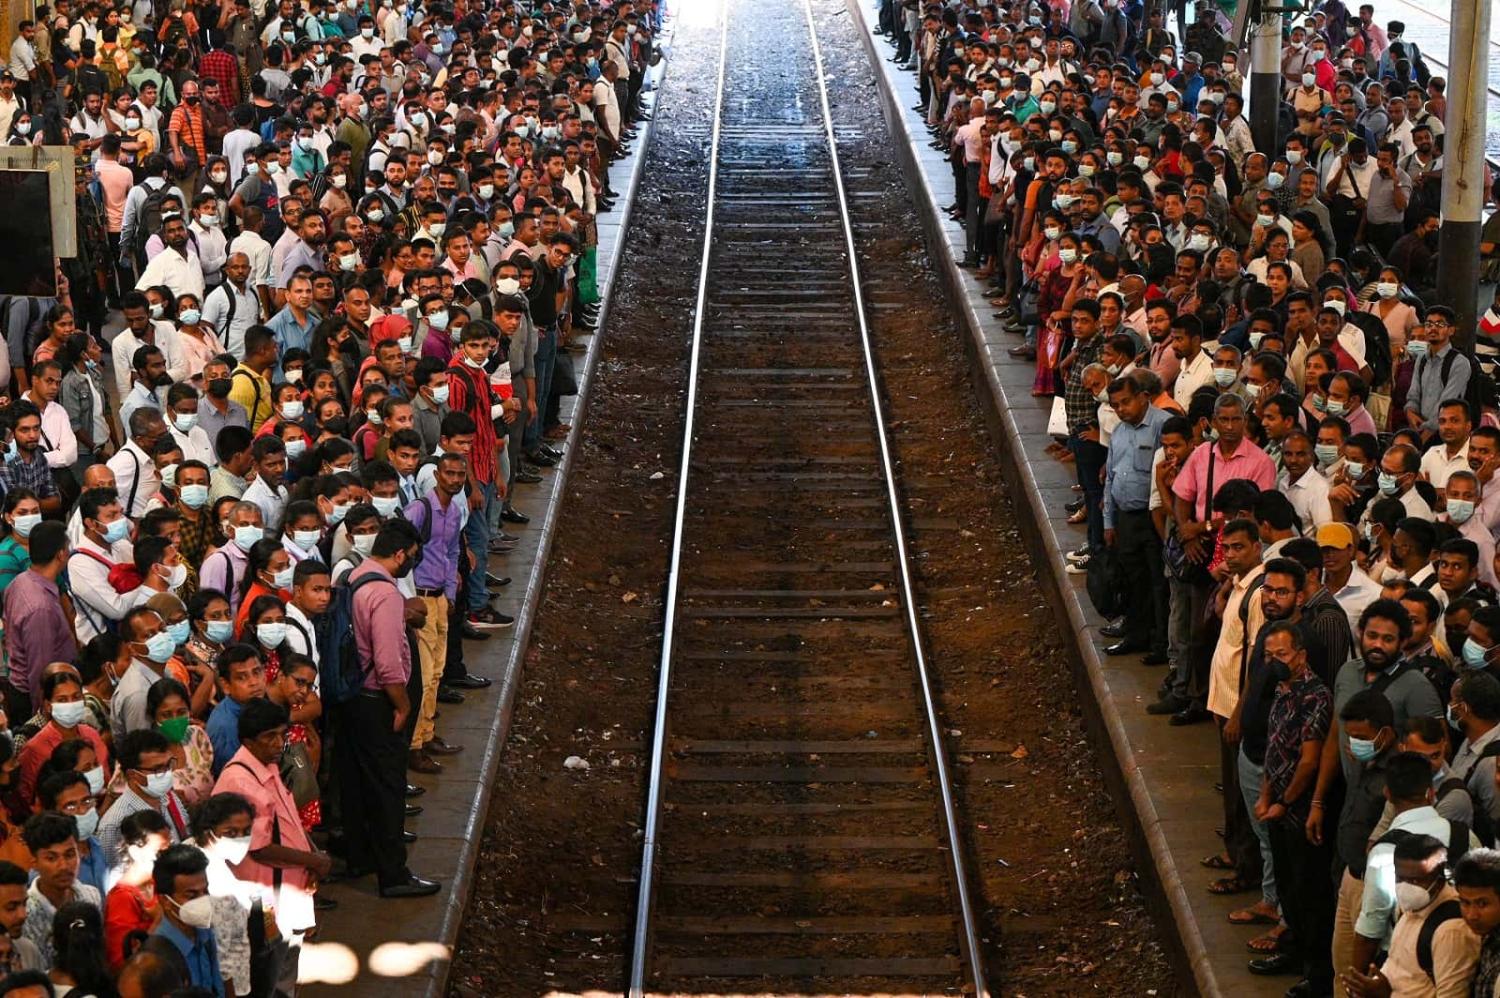 Commuters wait to board a train at the Fort railway station during a nationwide strike in Colombo on 15 March 2023 (Ishara S. Kodikara/AFP via Getty Images)